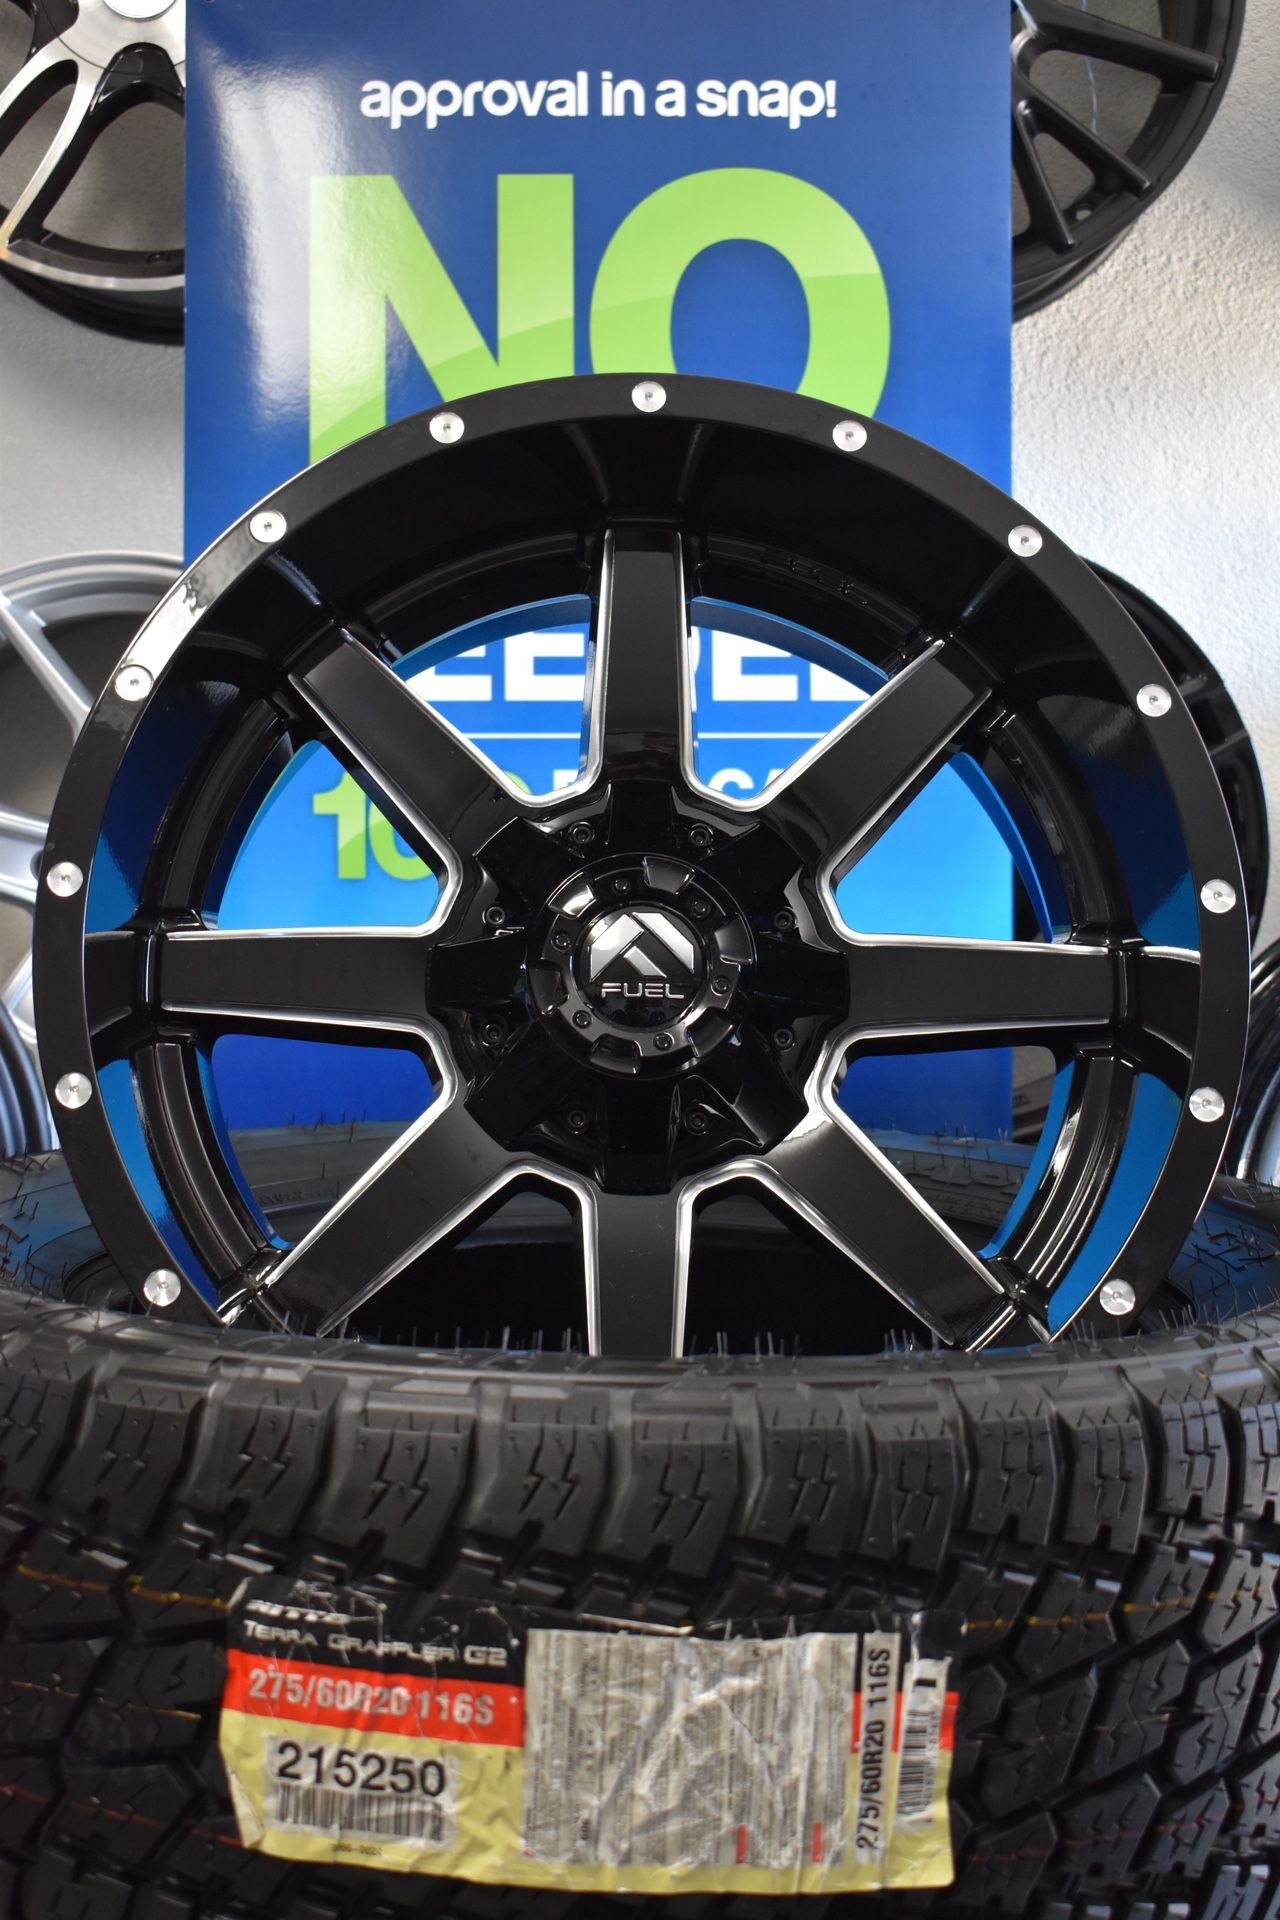 20” Off-road tires and wheels starting at $1699 installed! (Fits Silverado, Titan, 6lug ram, & Ford F150. Finance Rims & tires for only $39 down!)